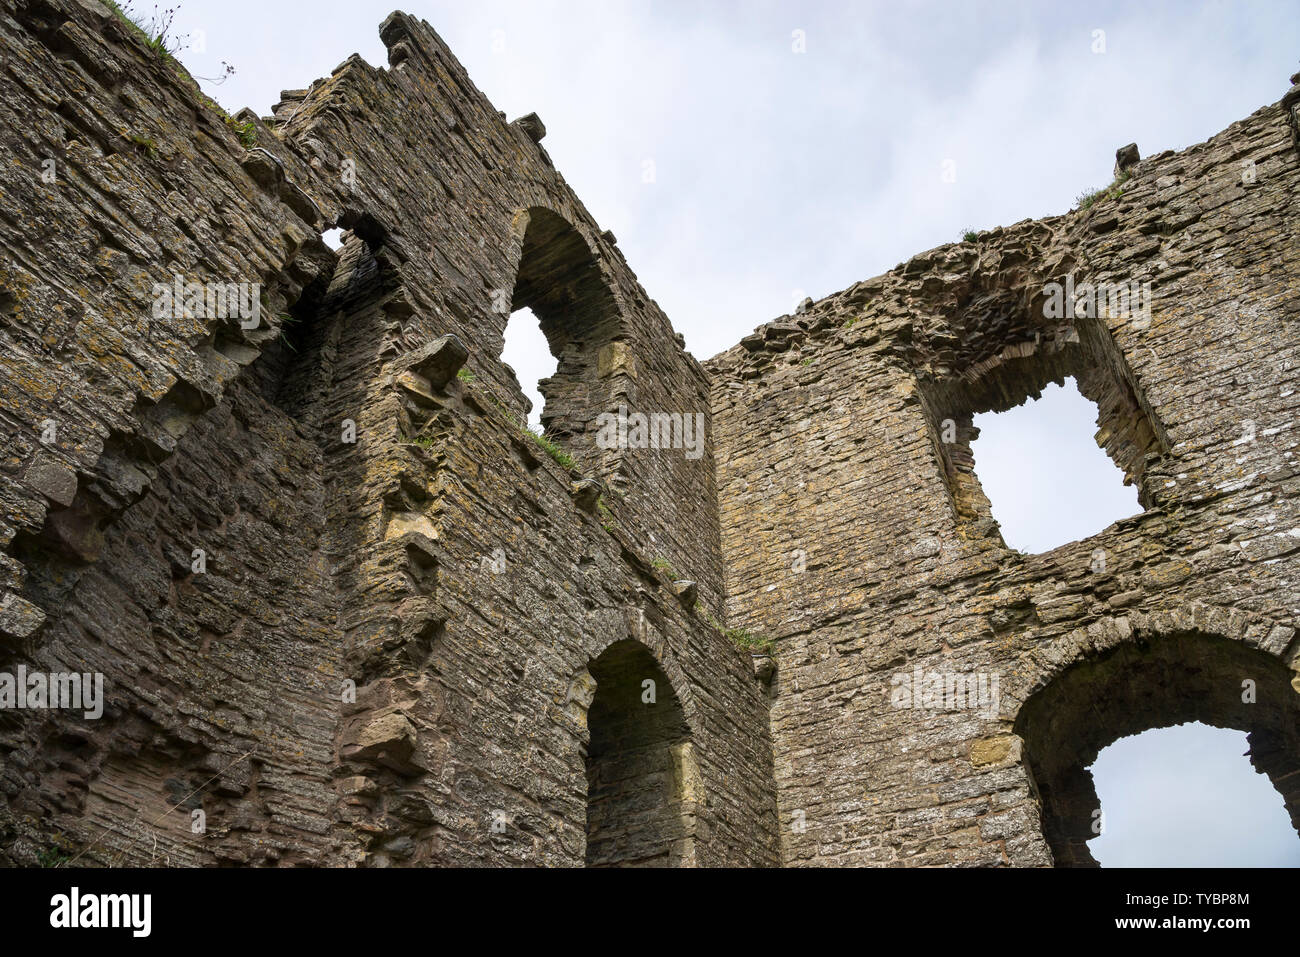 Ruins of Clun castle in the Shropshire hills, England. An 11th century castle with later 13th century keep. Stock Photo